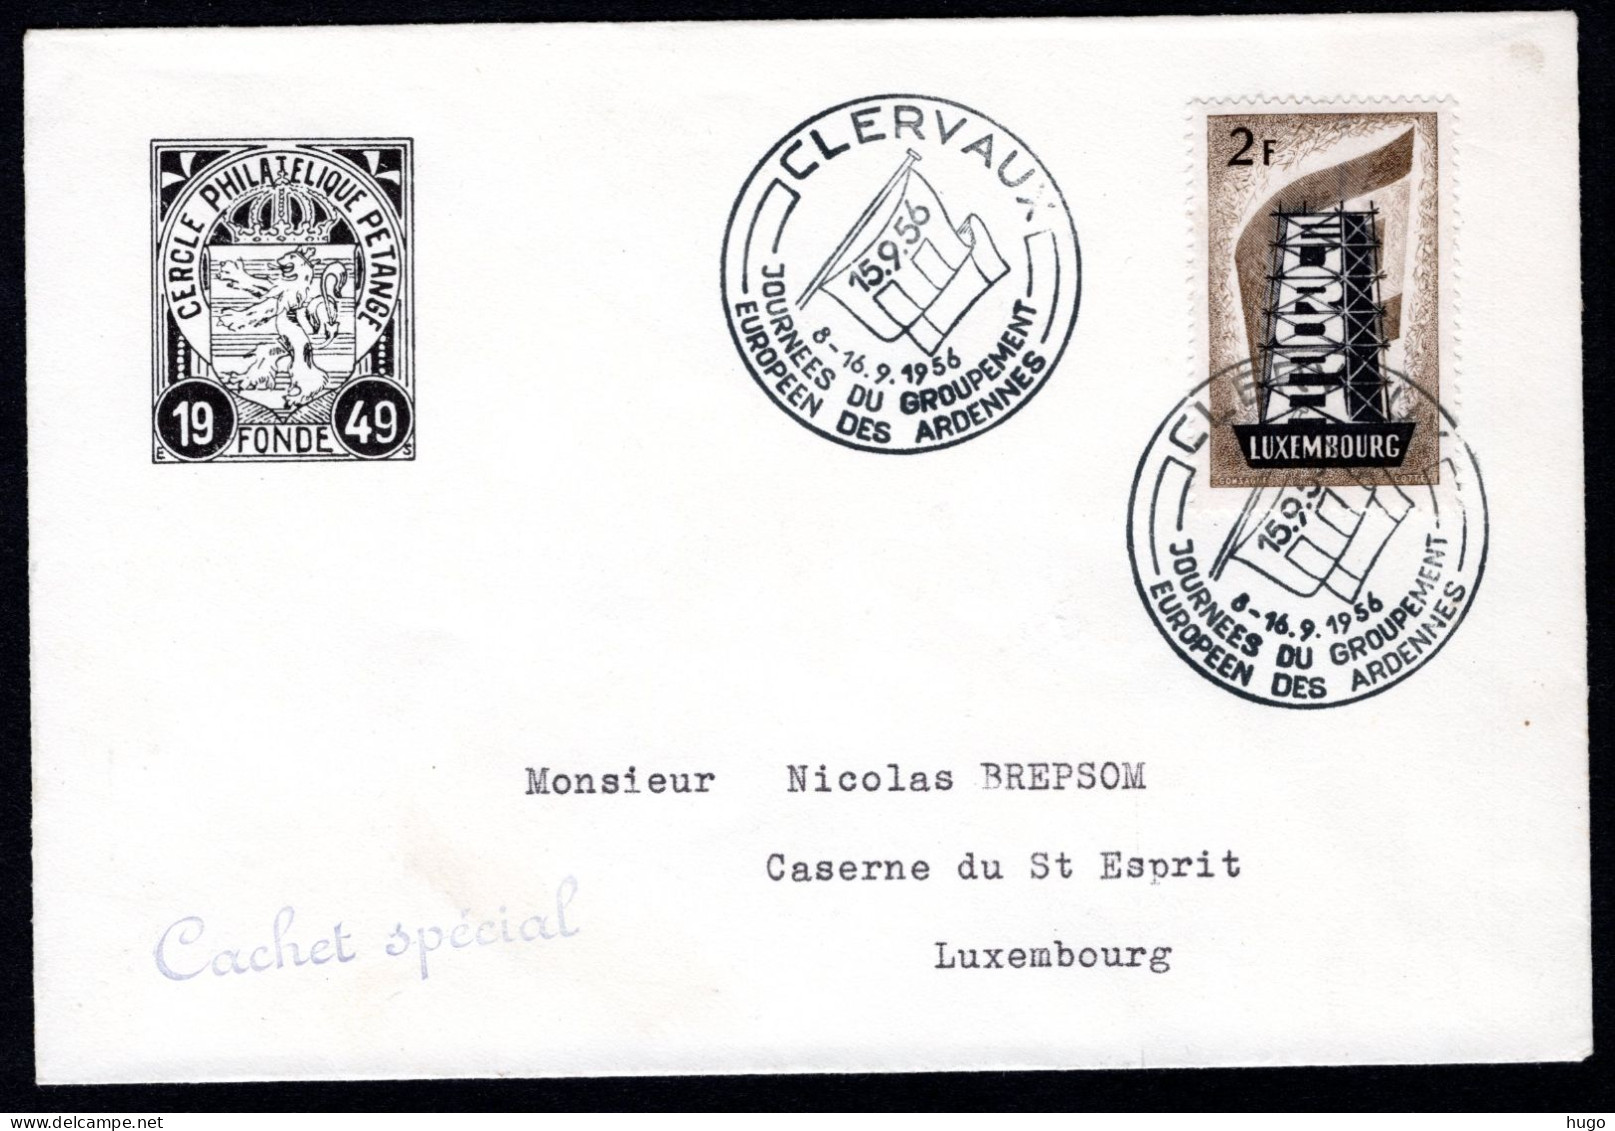 LUXEMBURG Yt. 514 FDC 1956 - EUROPA - Lettres & Documents